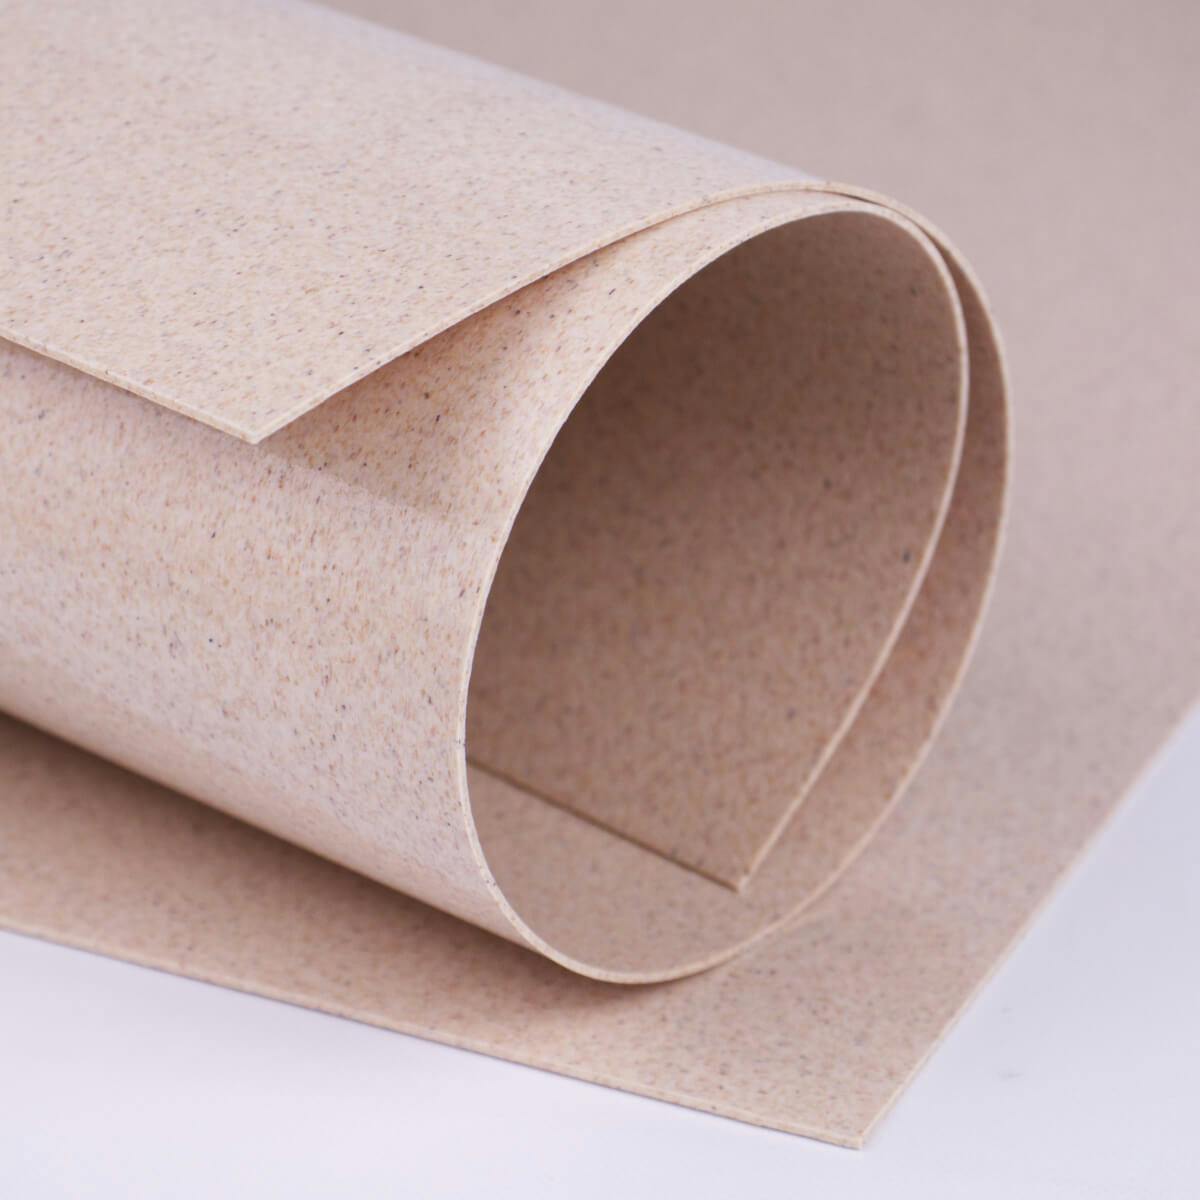 Rolled sheet of Cosplayflex thermoplastic